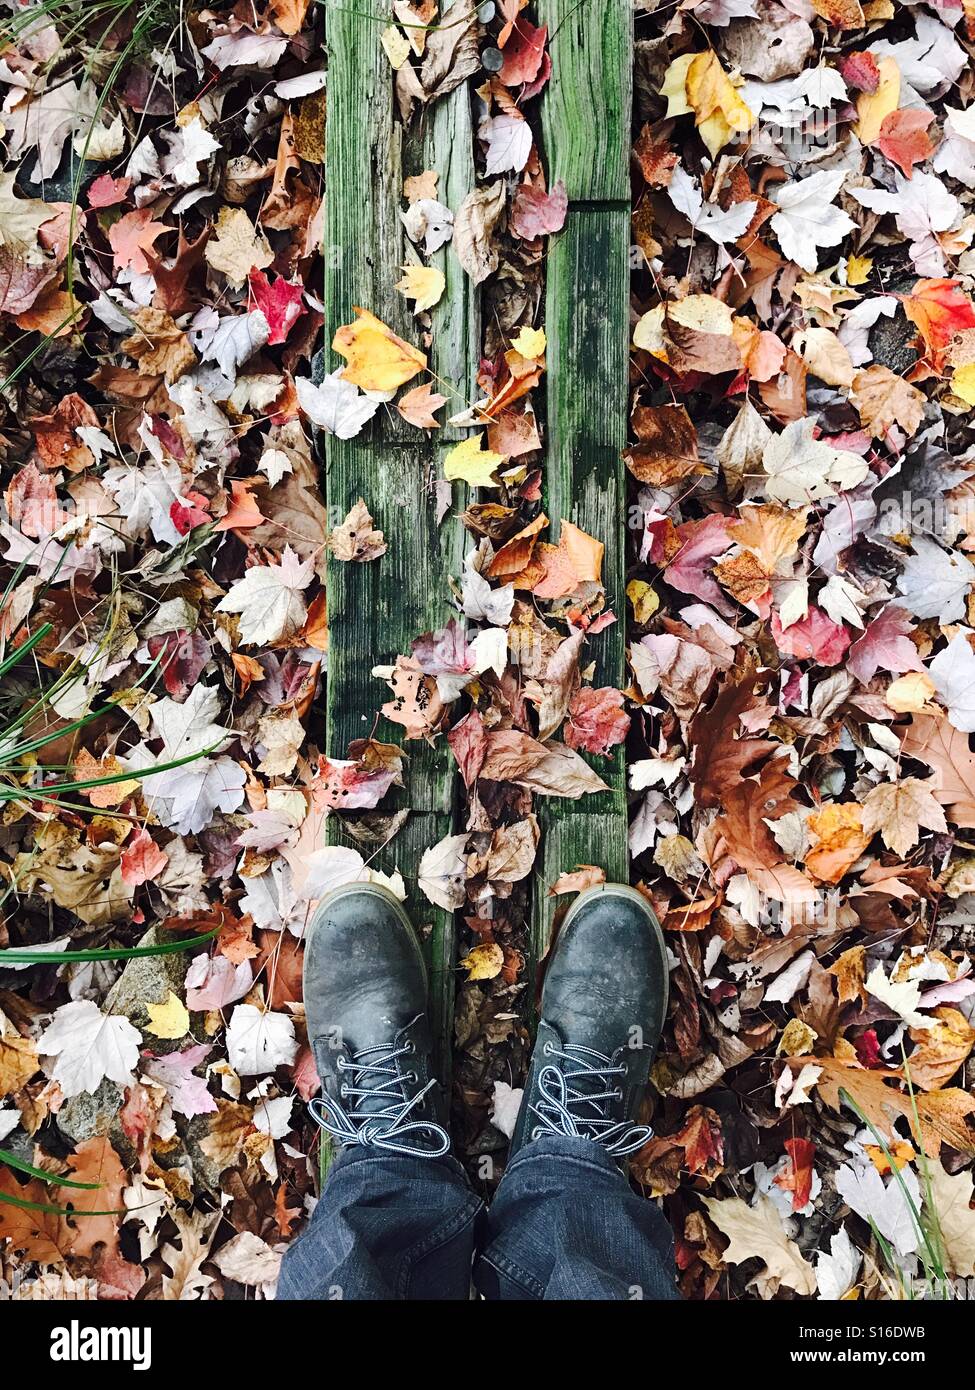 Standing in the fallen leaves. New Jersey, USA. Stock Photo